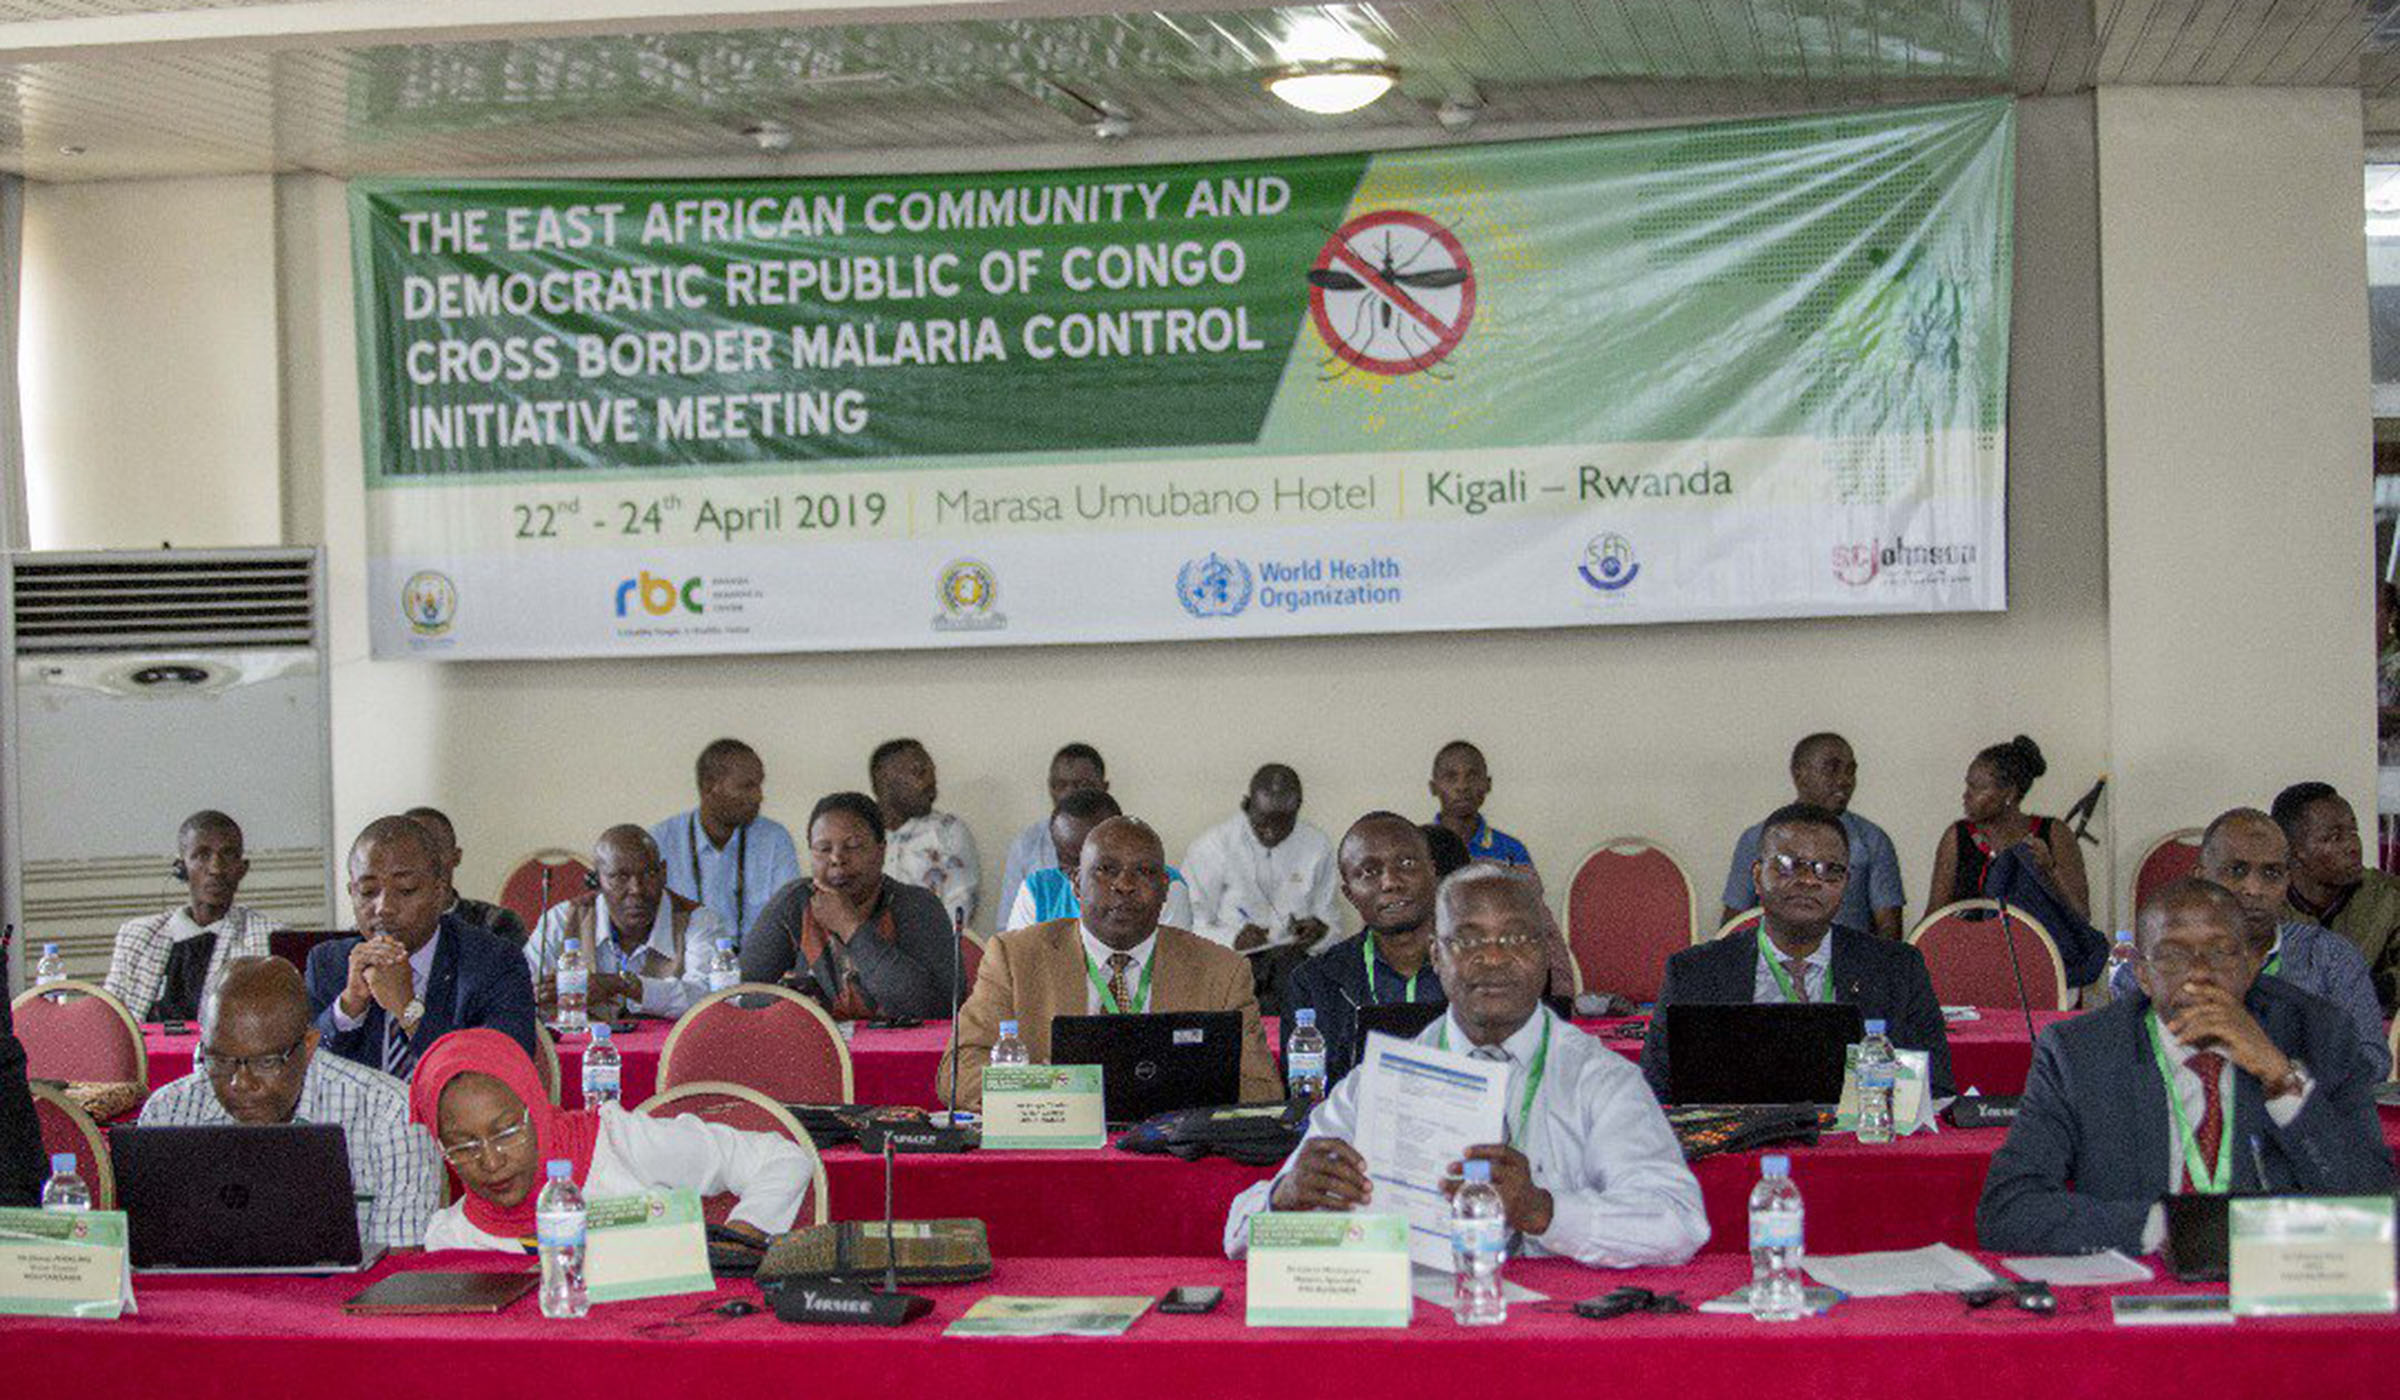 Participants during the just-concluded EAC and DR Congo Cross Border Malaria control initiative meeting in Kigali. Courtesy photos.